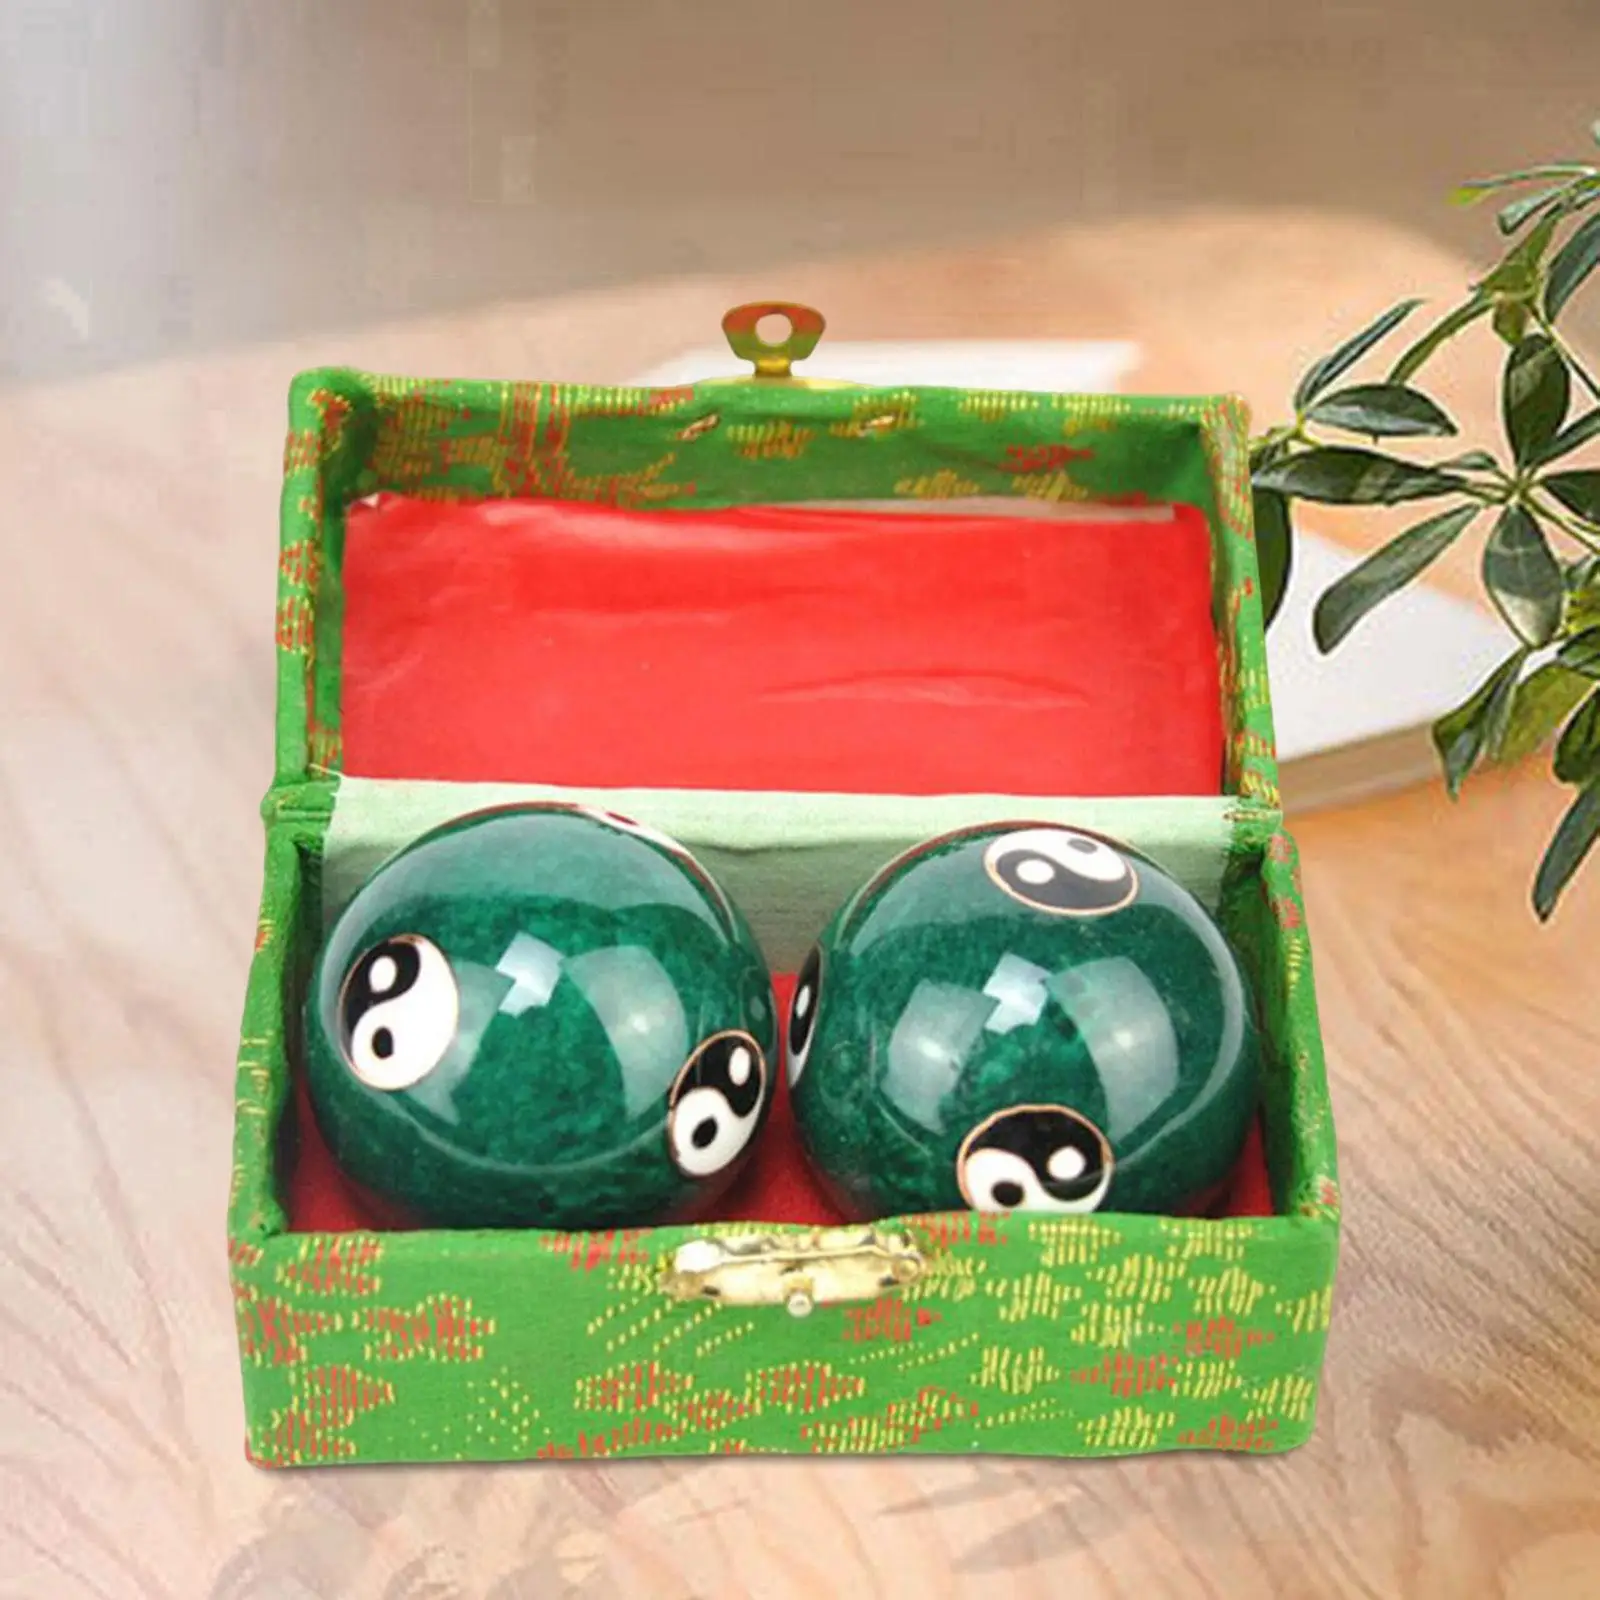 2 Pieces Chinese Massage Balls Exercise Handballs with Storage Box Gift Smooth